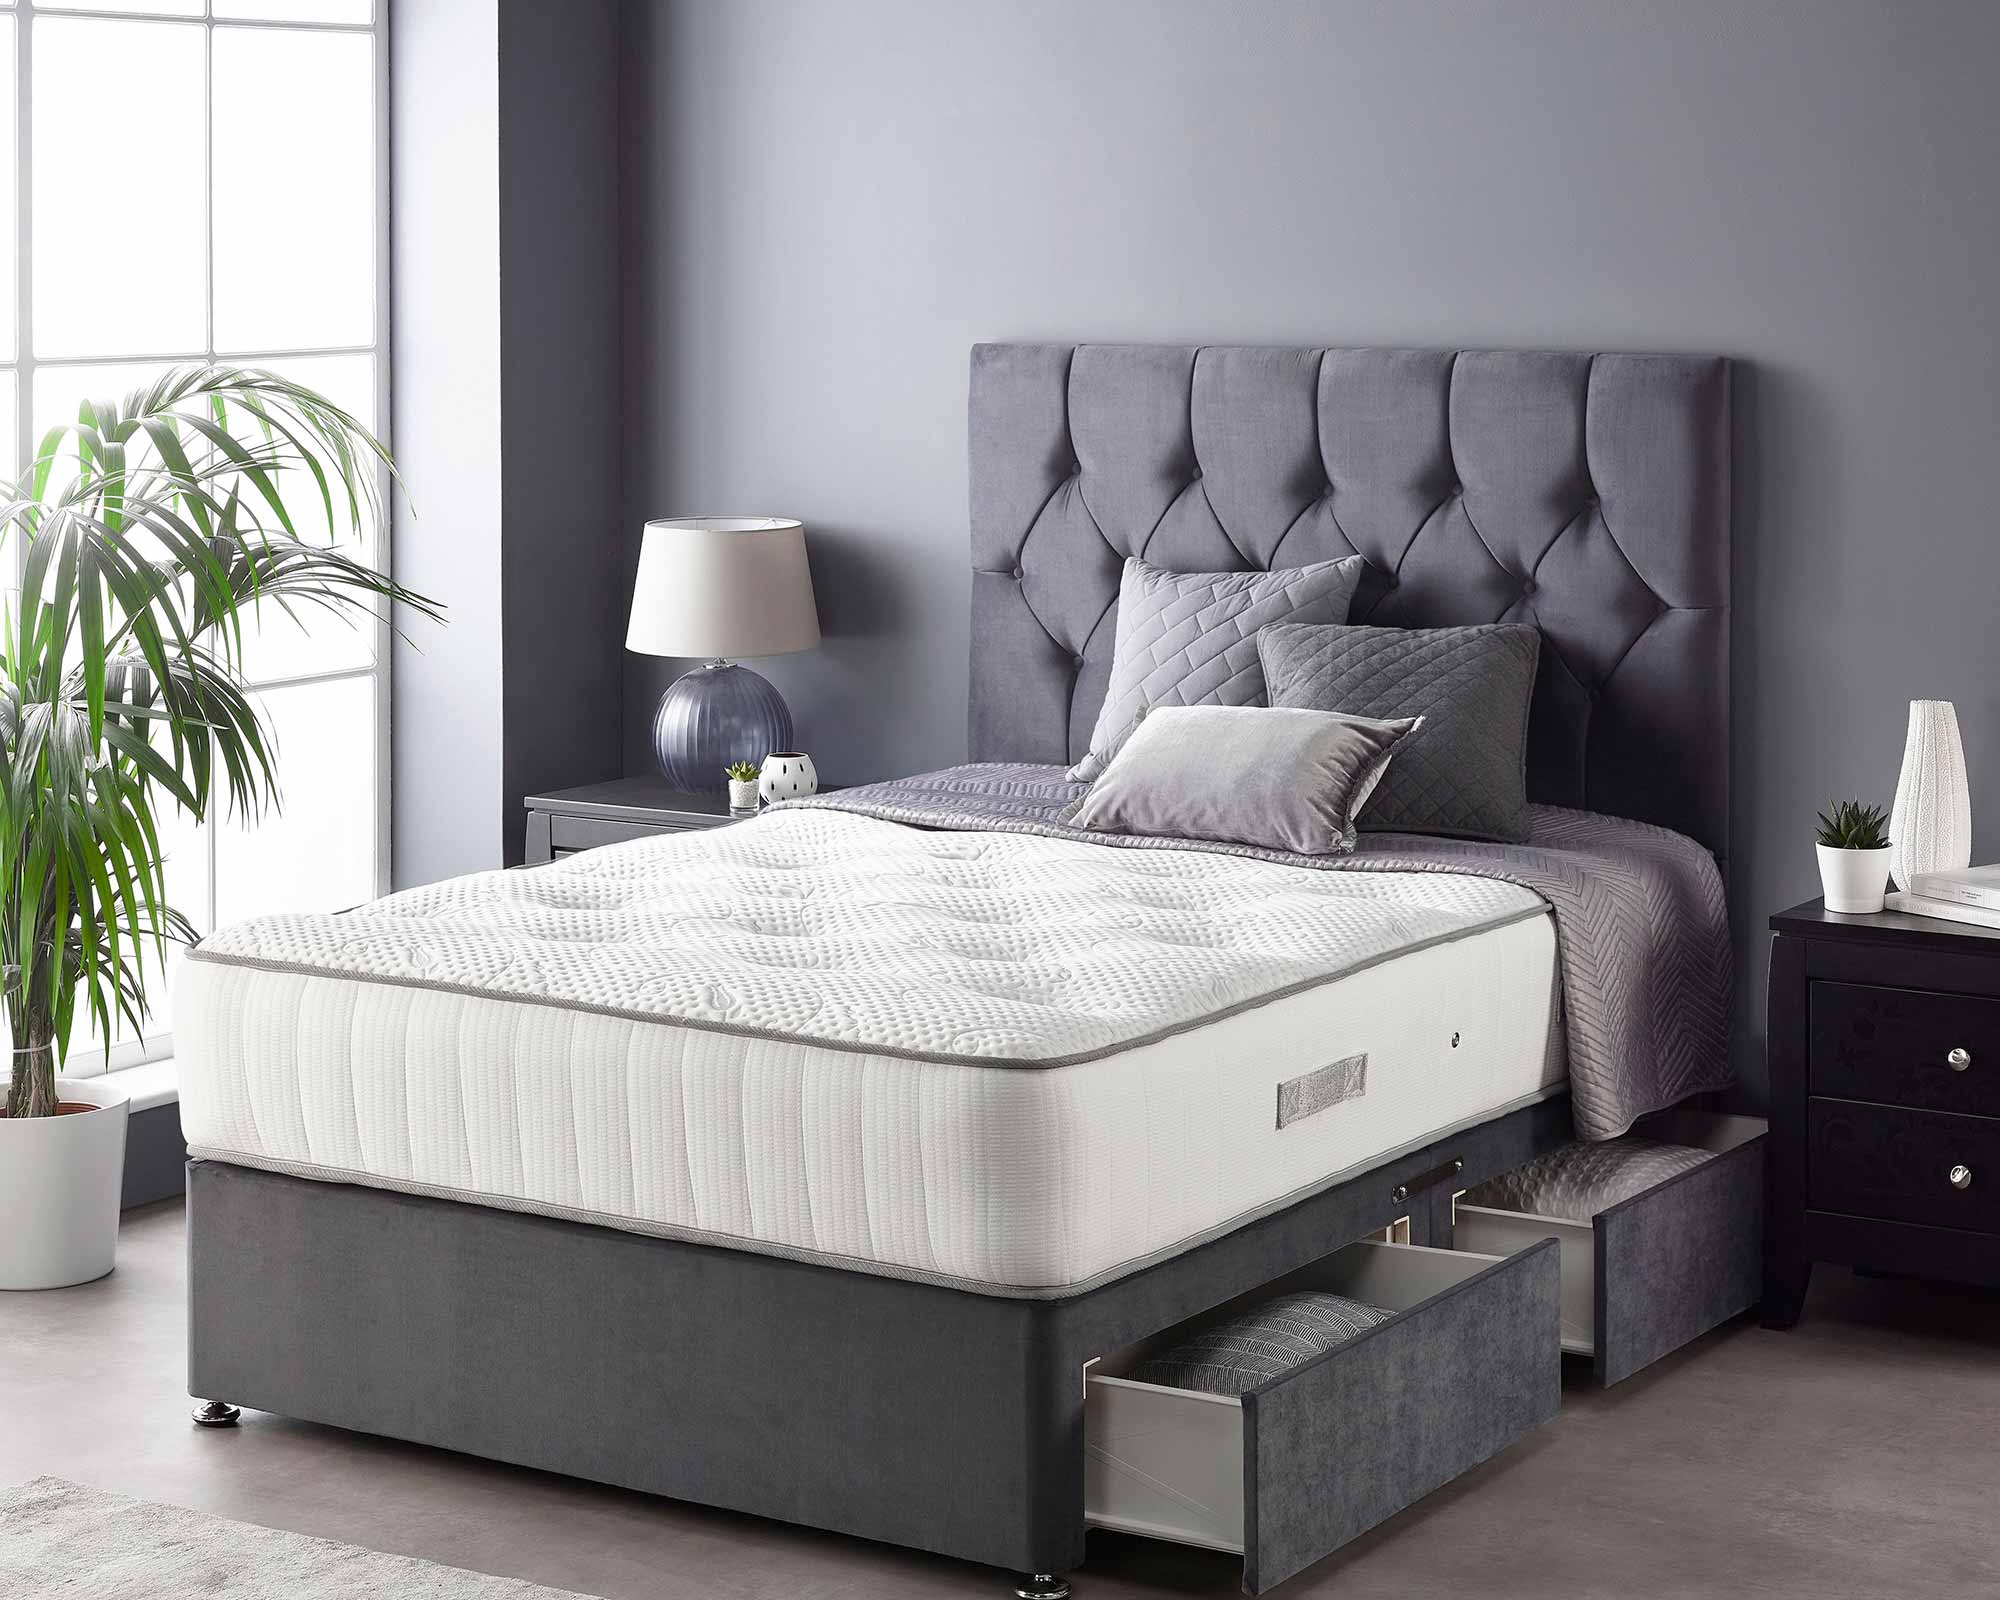 Catherine-Lansfield-Boutique-Divan-Base-and-Headboard-with-Free-Natural-Cashmere-Mattress-Steel-Side.jpg